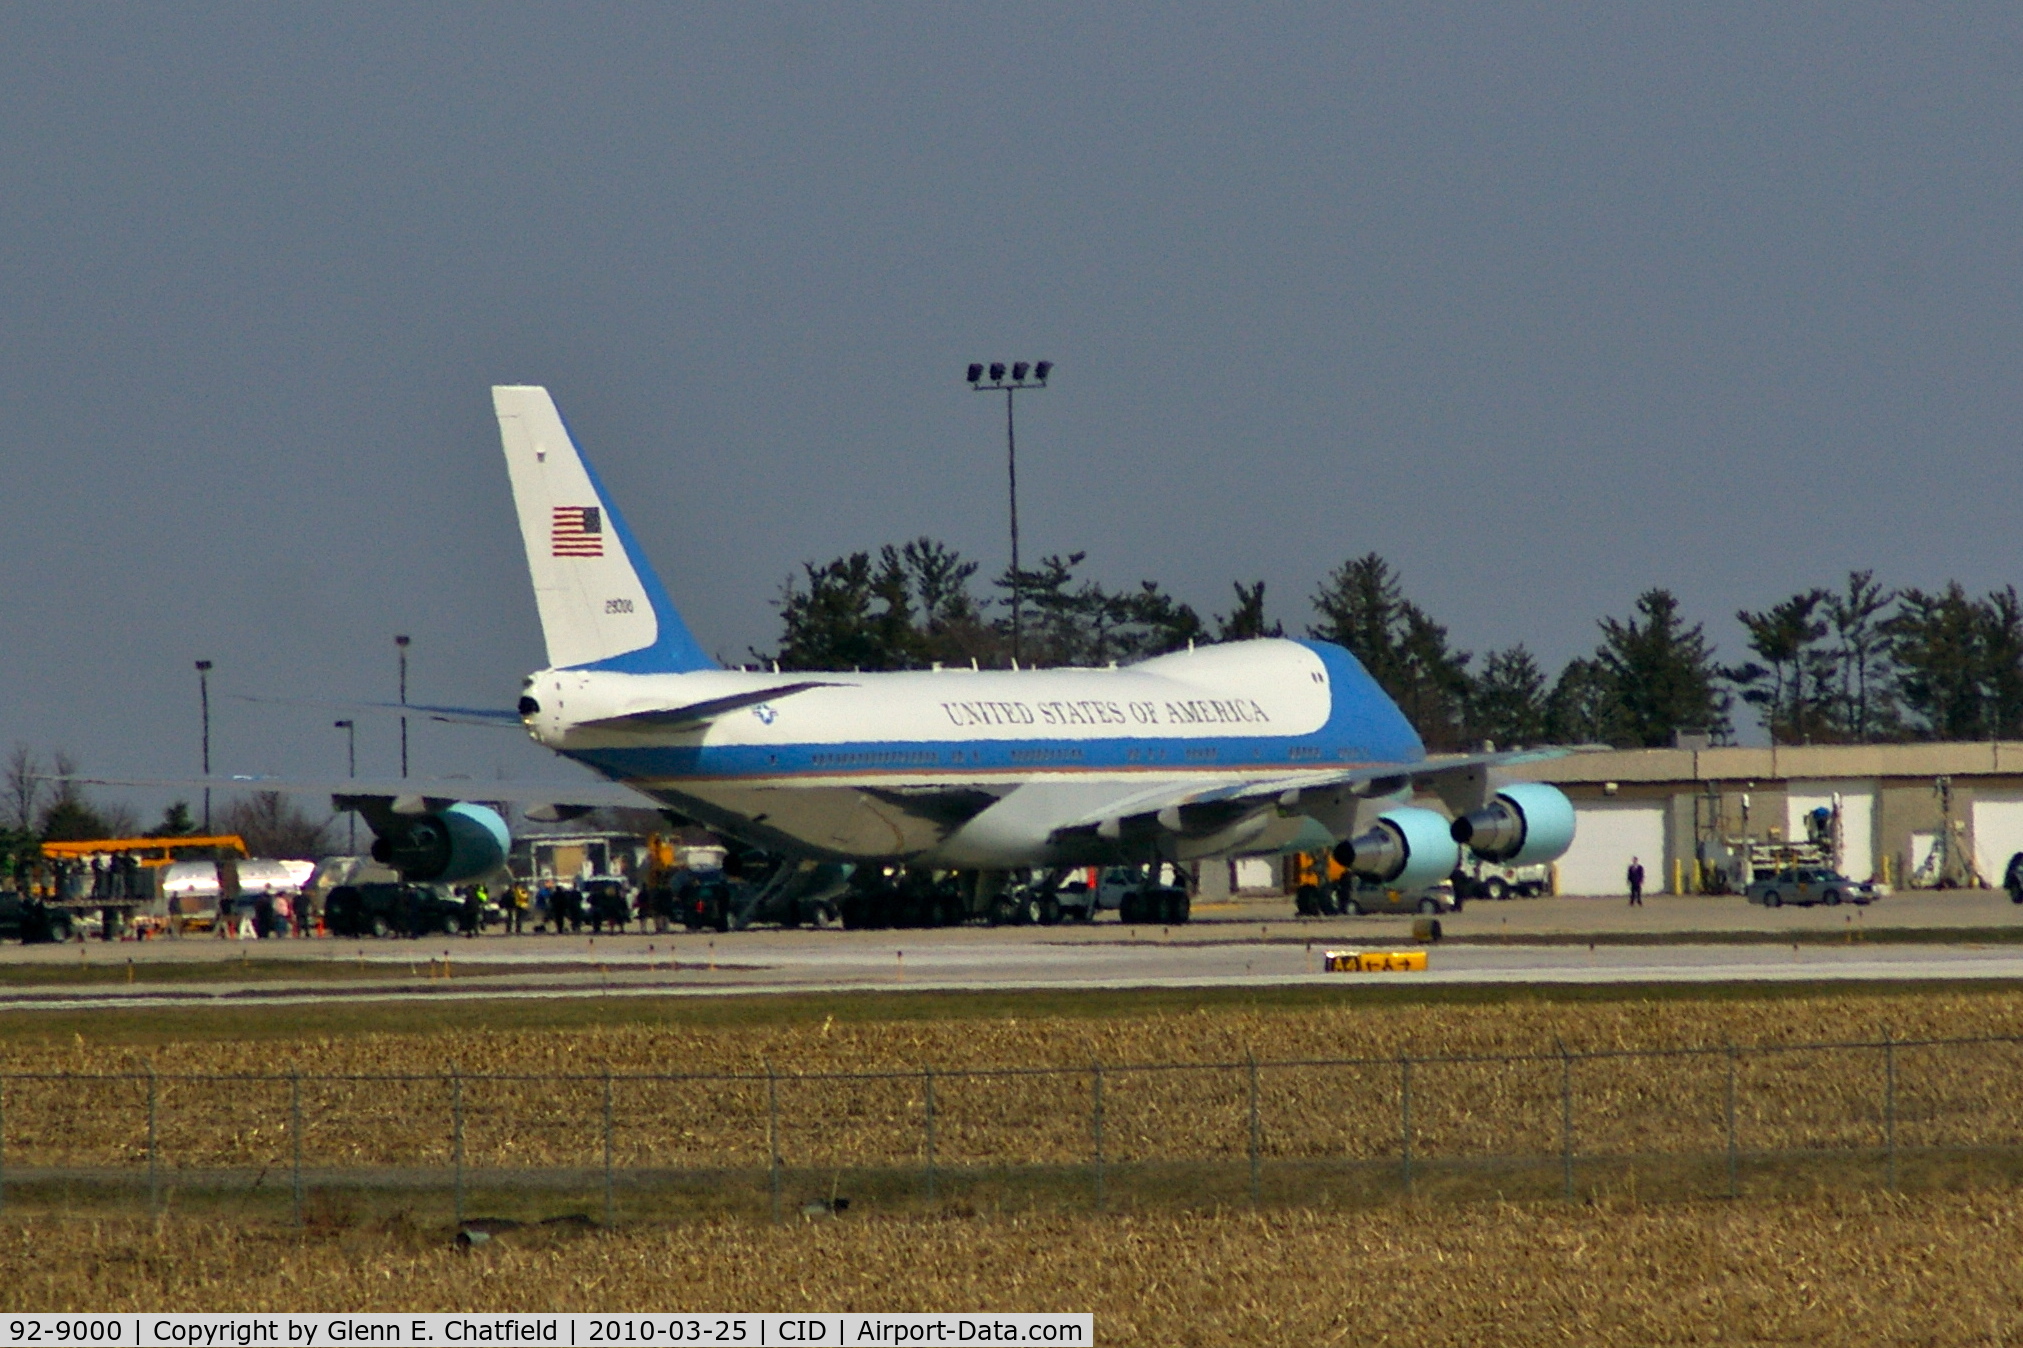 92-9000, 1987 Boeing VC-25A (747-2G4B) C/N 23825, Parked on the cargo ramp by the control tower